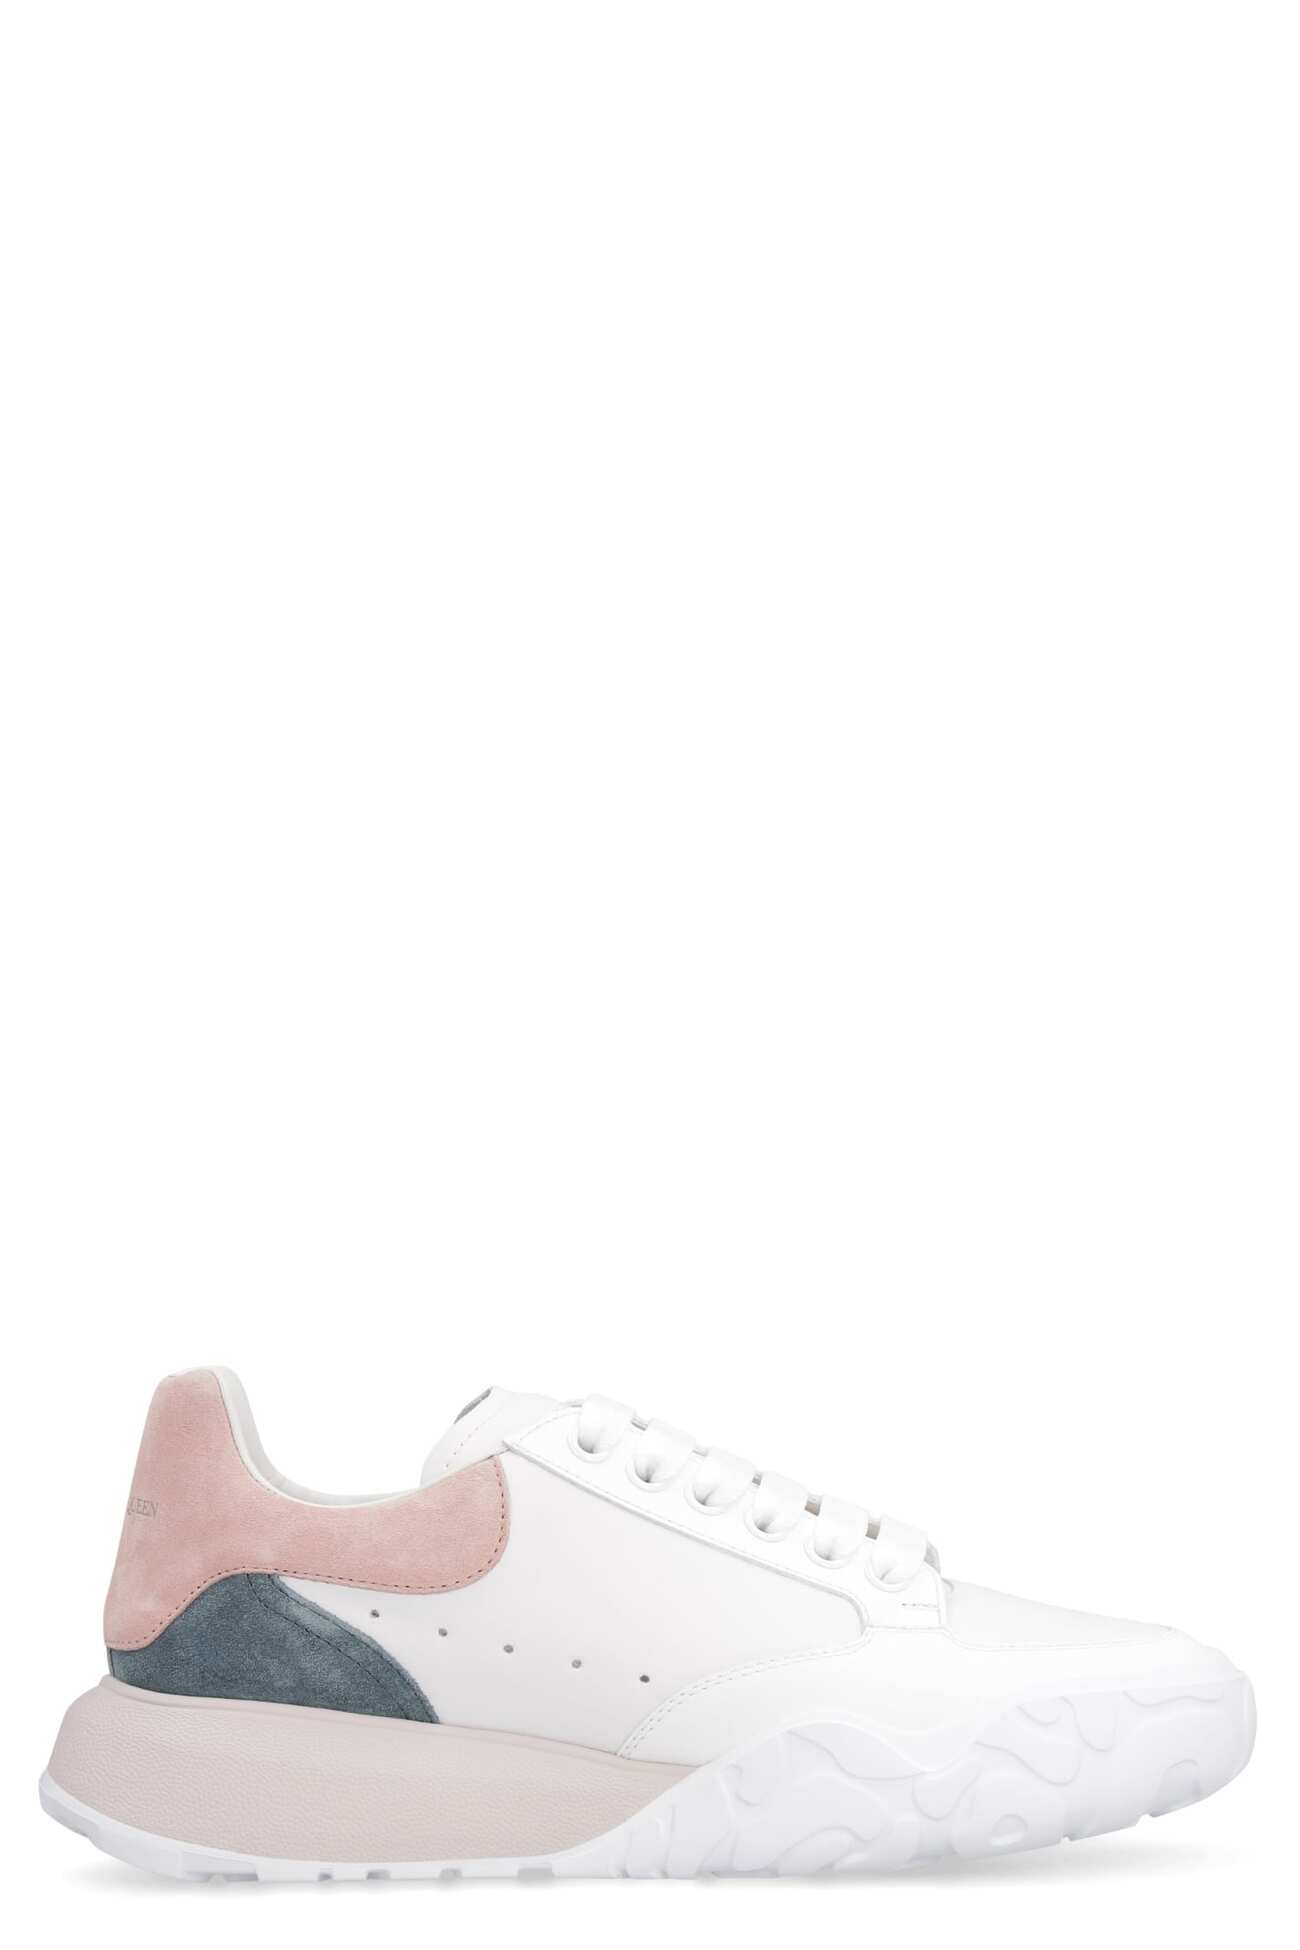 Alexander McQueen Court Leather Sneakers in white